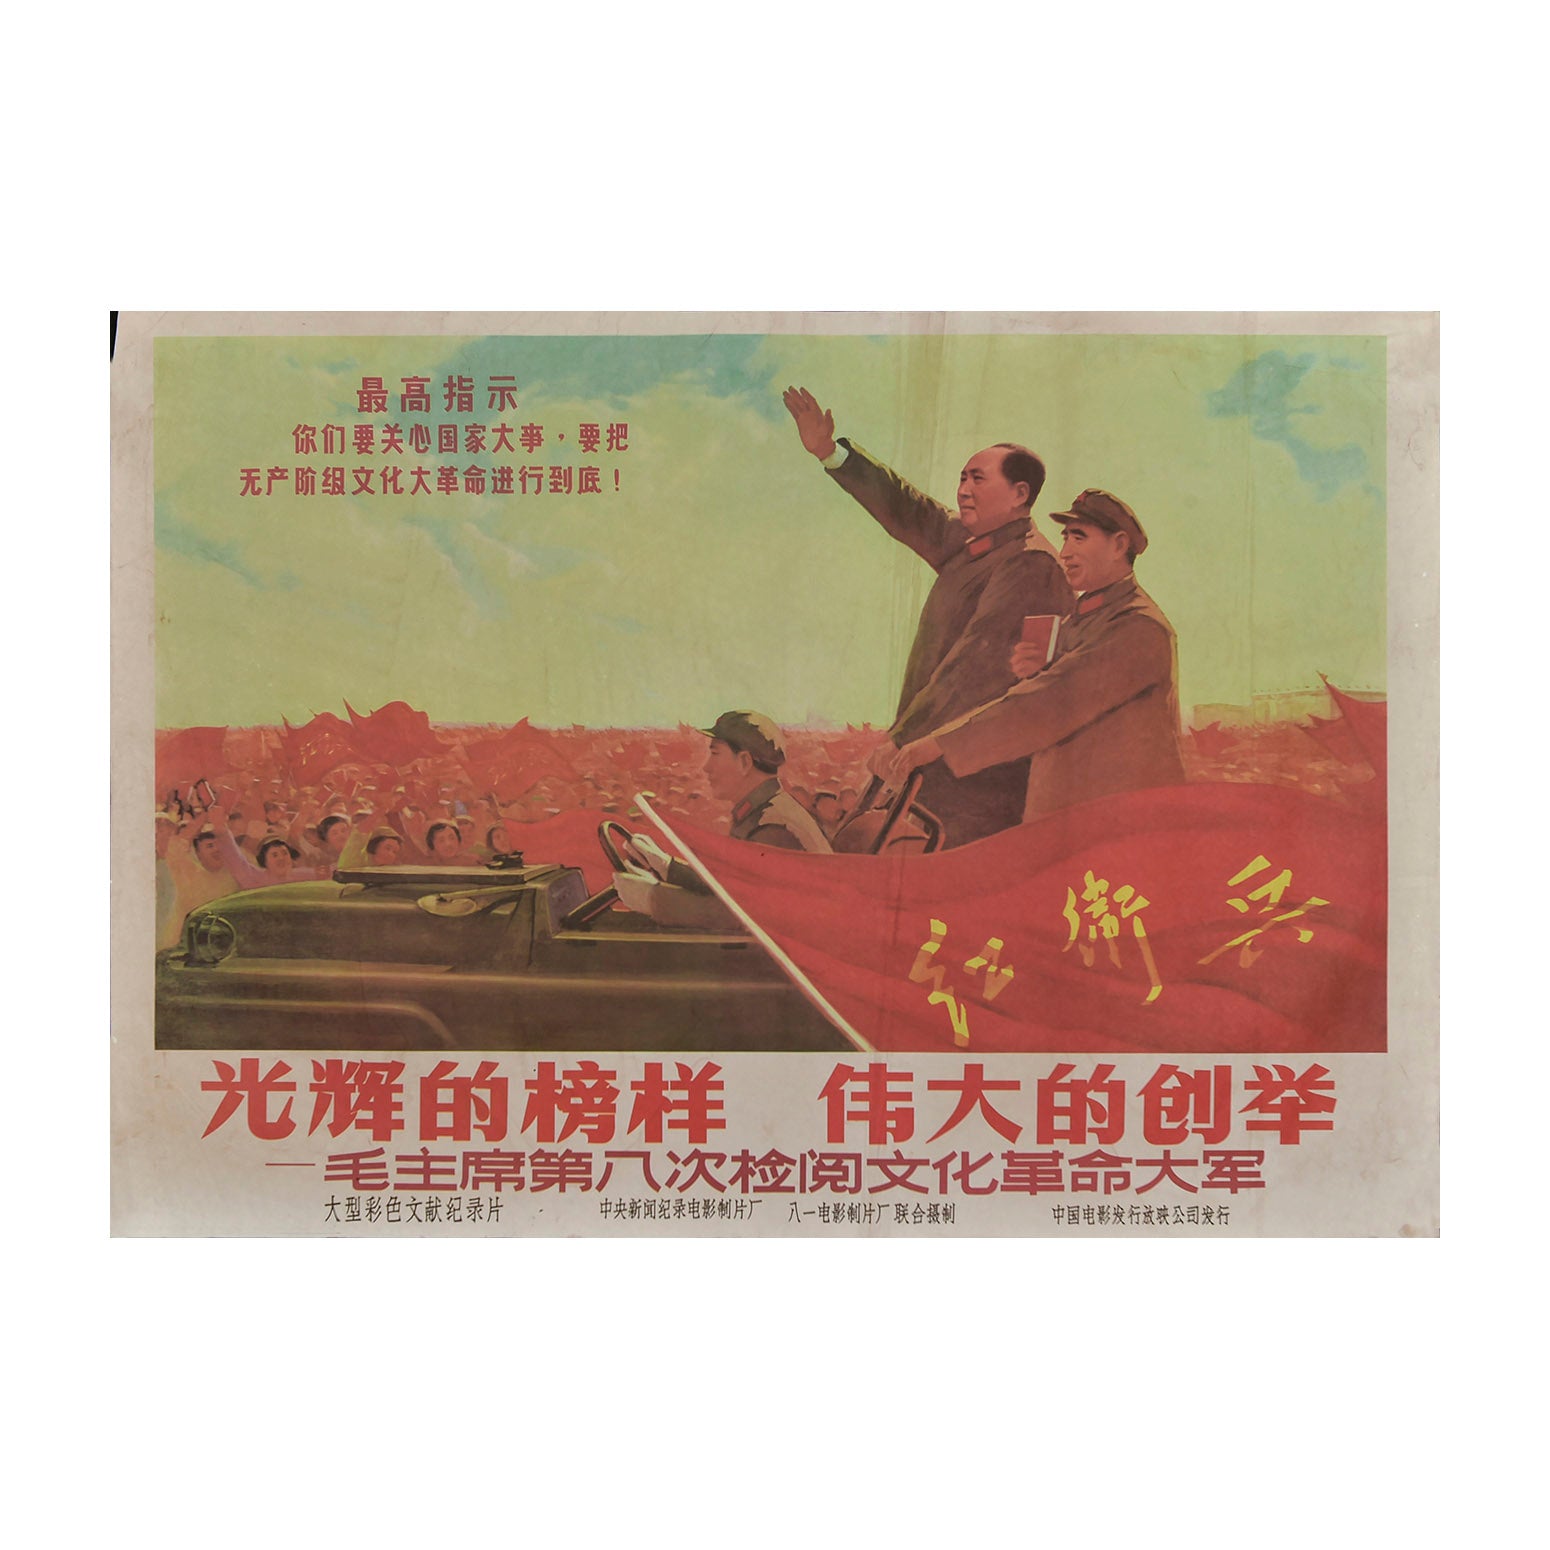 Original Chinese Communist Party poster, c. 1960s. The image depicts Chairman Mao greeting crowns of banner waving Chinese citizens. To his left, a Party official prominently displays his copy of Quotations from Chairman Mao Tse-tung (known as ‘The Little Red Book’ in the West). 